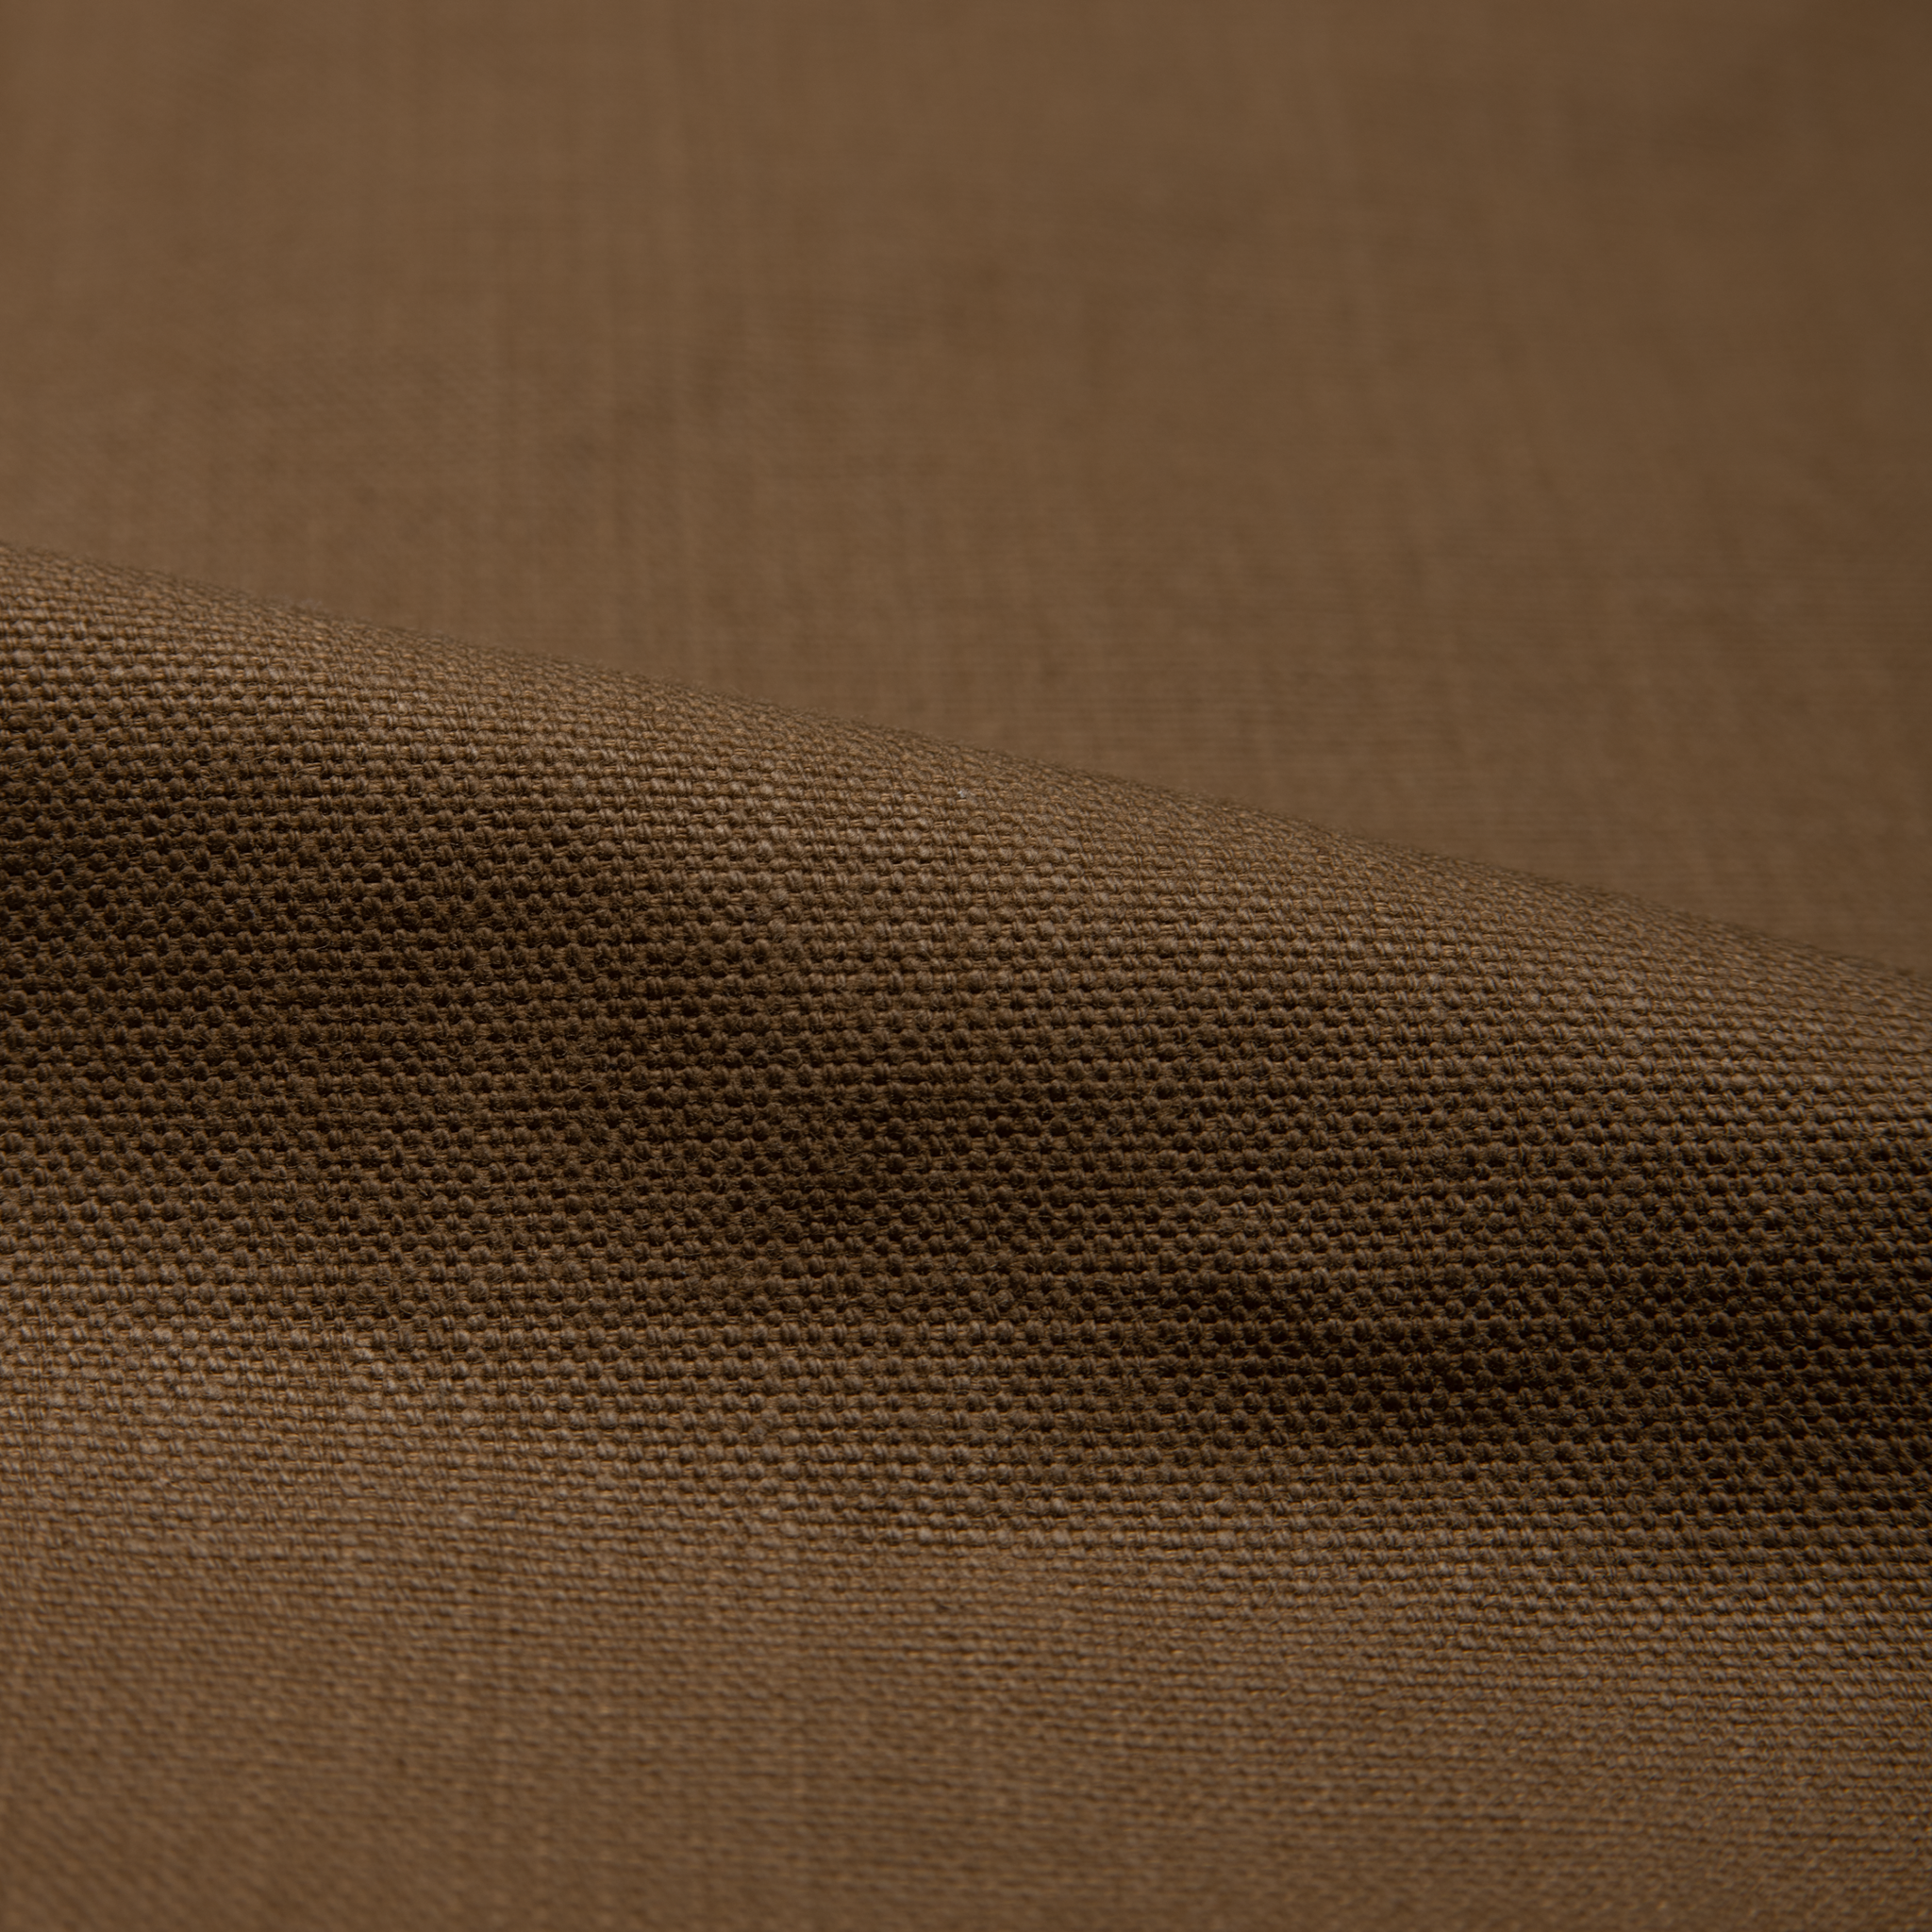  Raw Cotton Canvas - Brown - fabric 